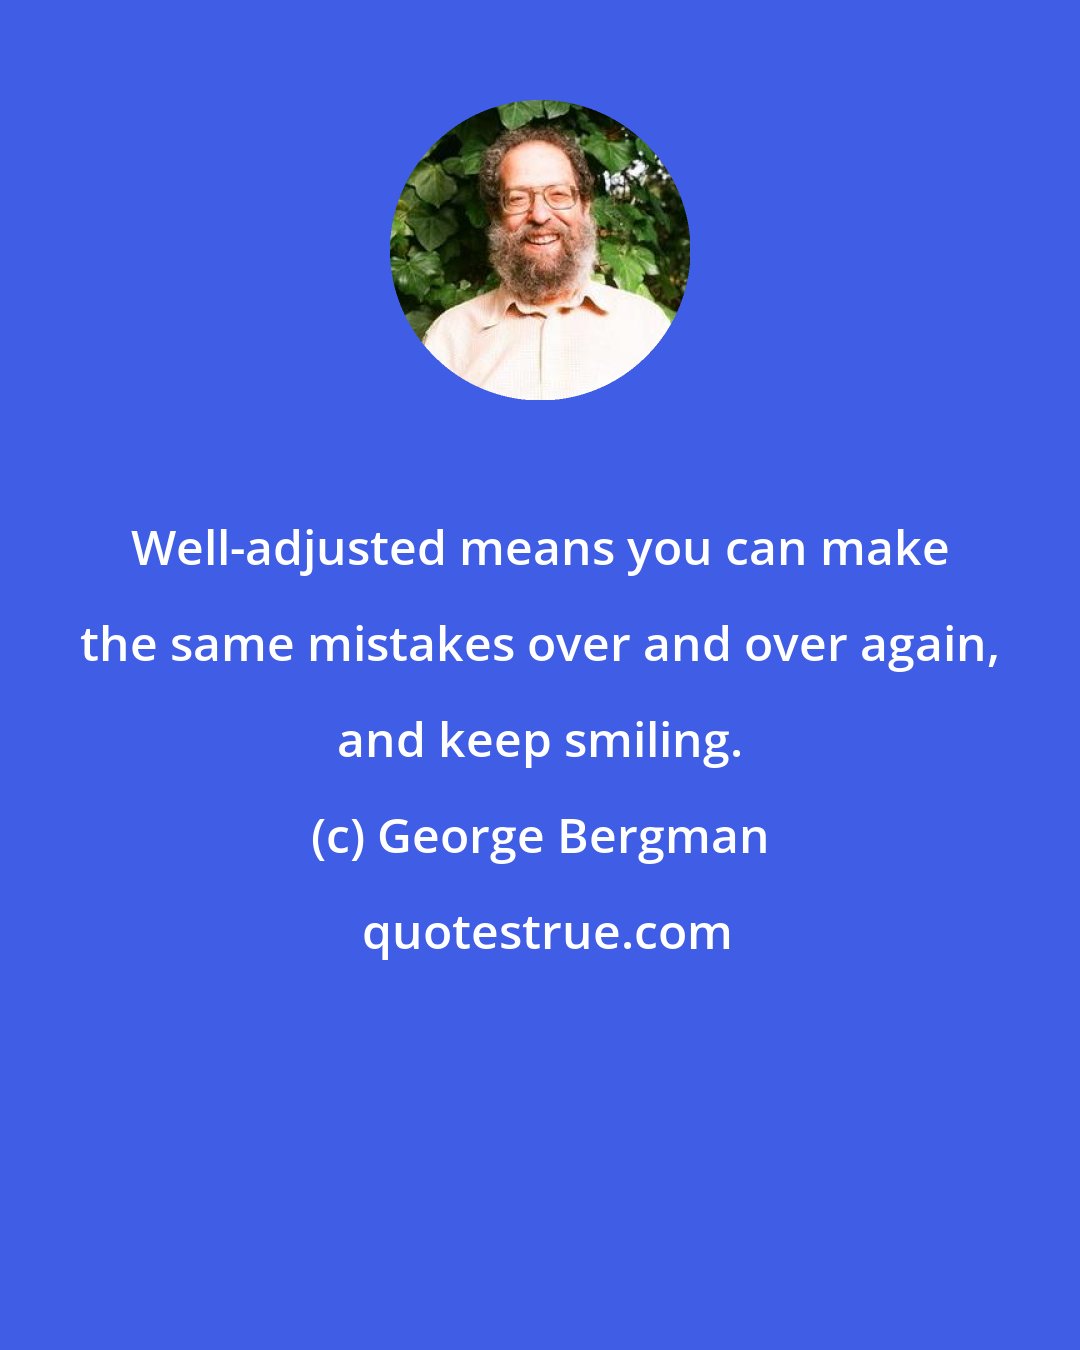 George Bergman: Well-adjusted means you can make the same mistakes over and over again, and keep smiling.